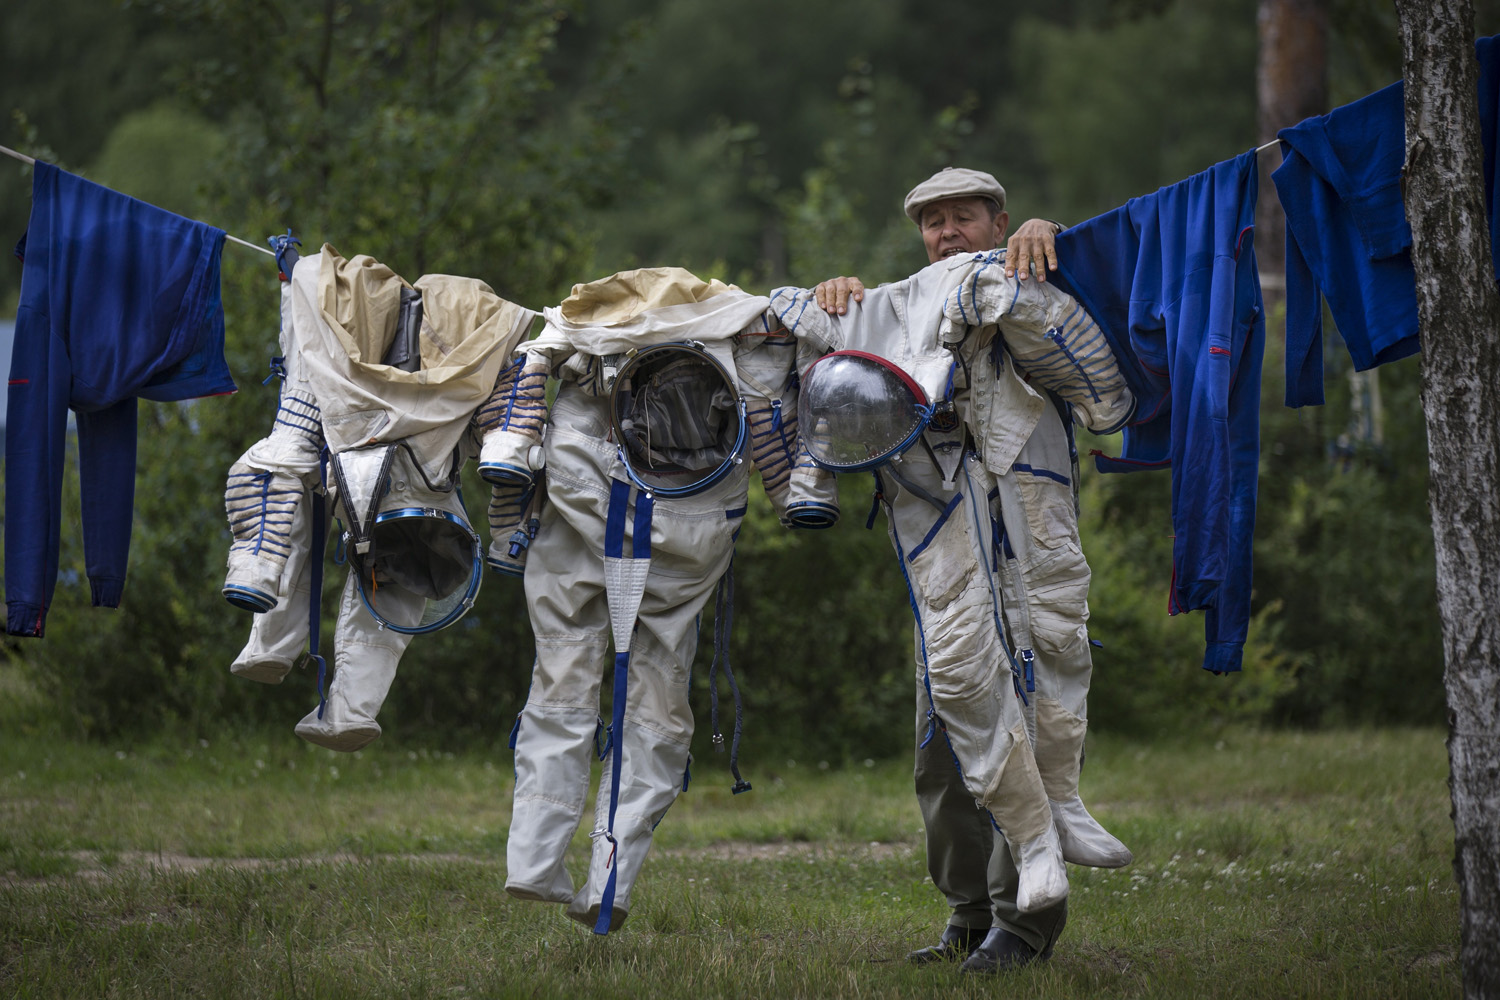 Jul. 2, 2014. An employe of Russian Space Training Center hangs out to dry space suits of Russian cosmonaut Anatoly Ivanishin, NASA's U.S. flight engineer Kathleen Rubins, and Japanese space agency's flight engineer Takuya Onishi, right, after their undergoing  training near in Noginsk, 60 km (38 miles) east of Moscow, Russia.